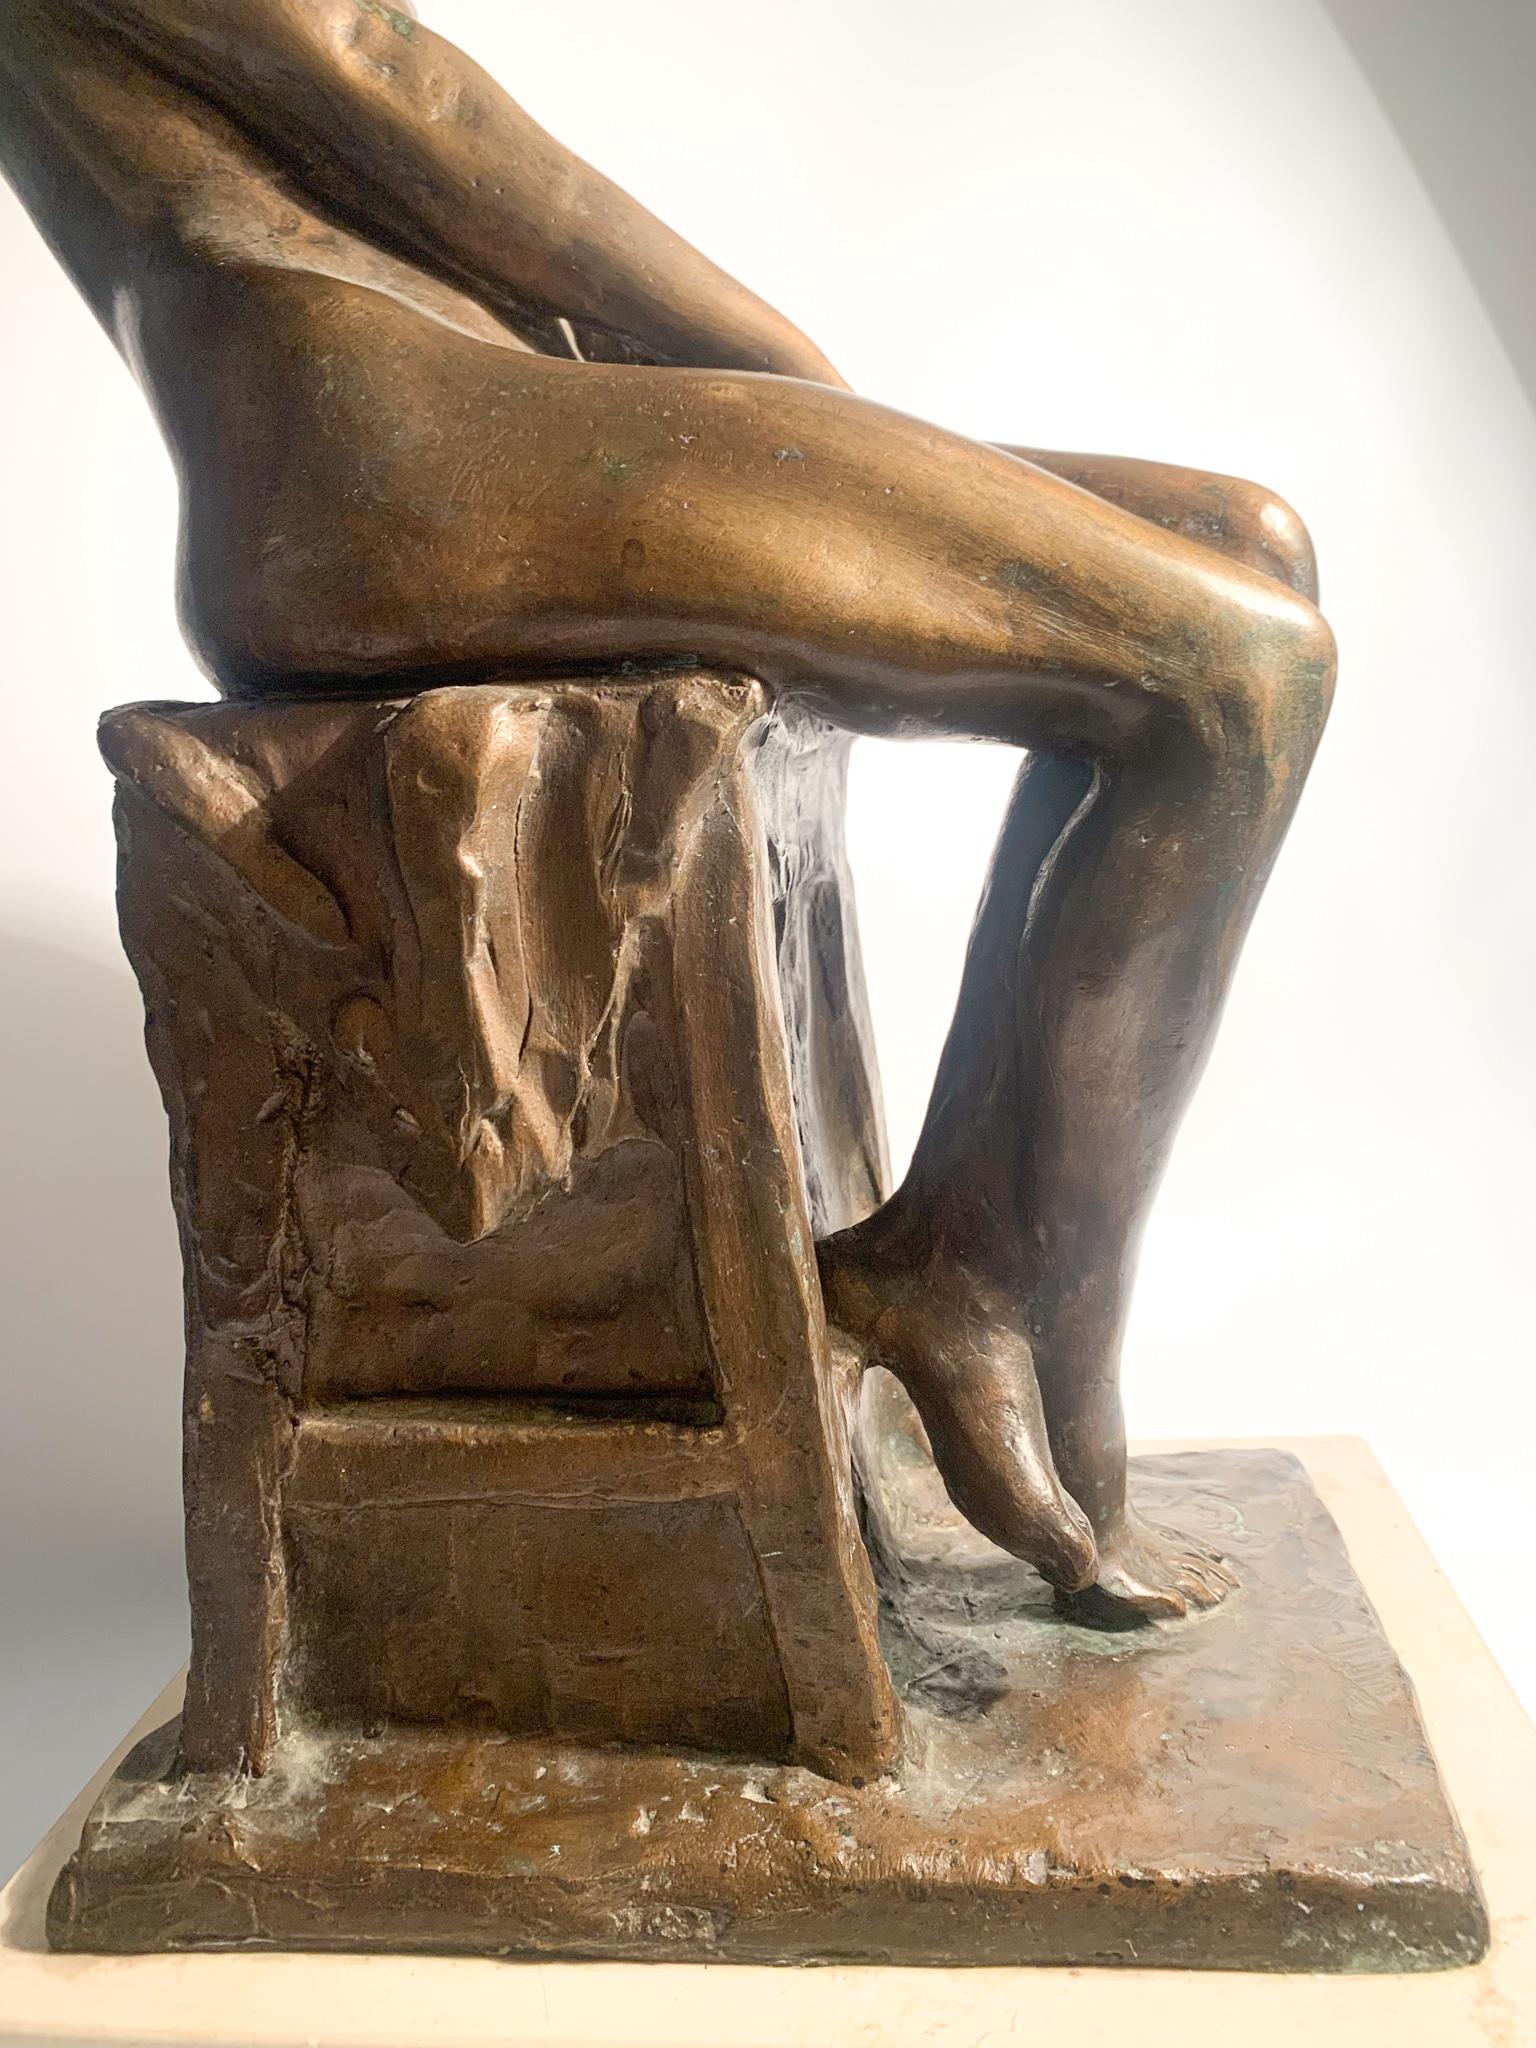 Italian Bronze Sculpture of a Nude Woman by Aurelio Capsoni, Early 1900 For Sale 4